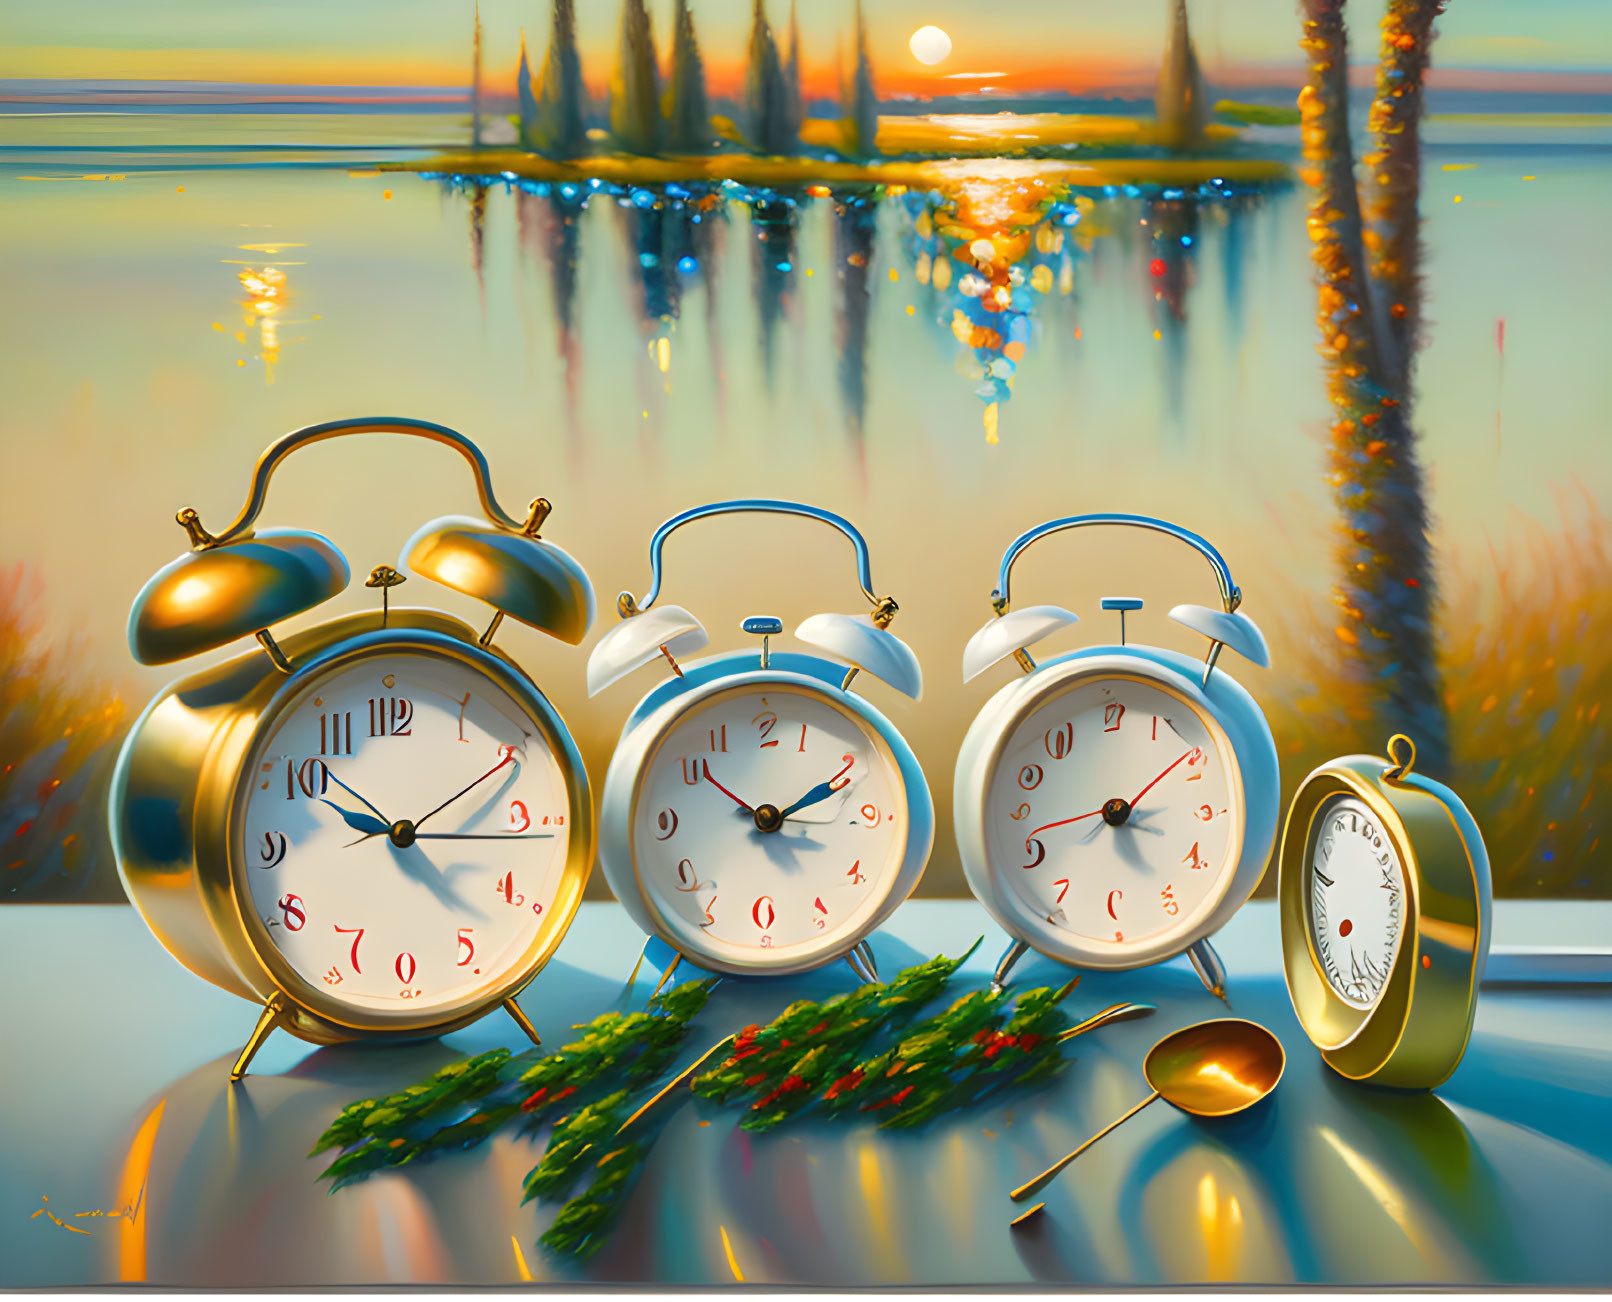 Surreal painting of four alarm clocks with vibrant sunset and lake reflection